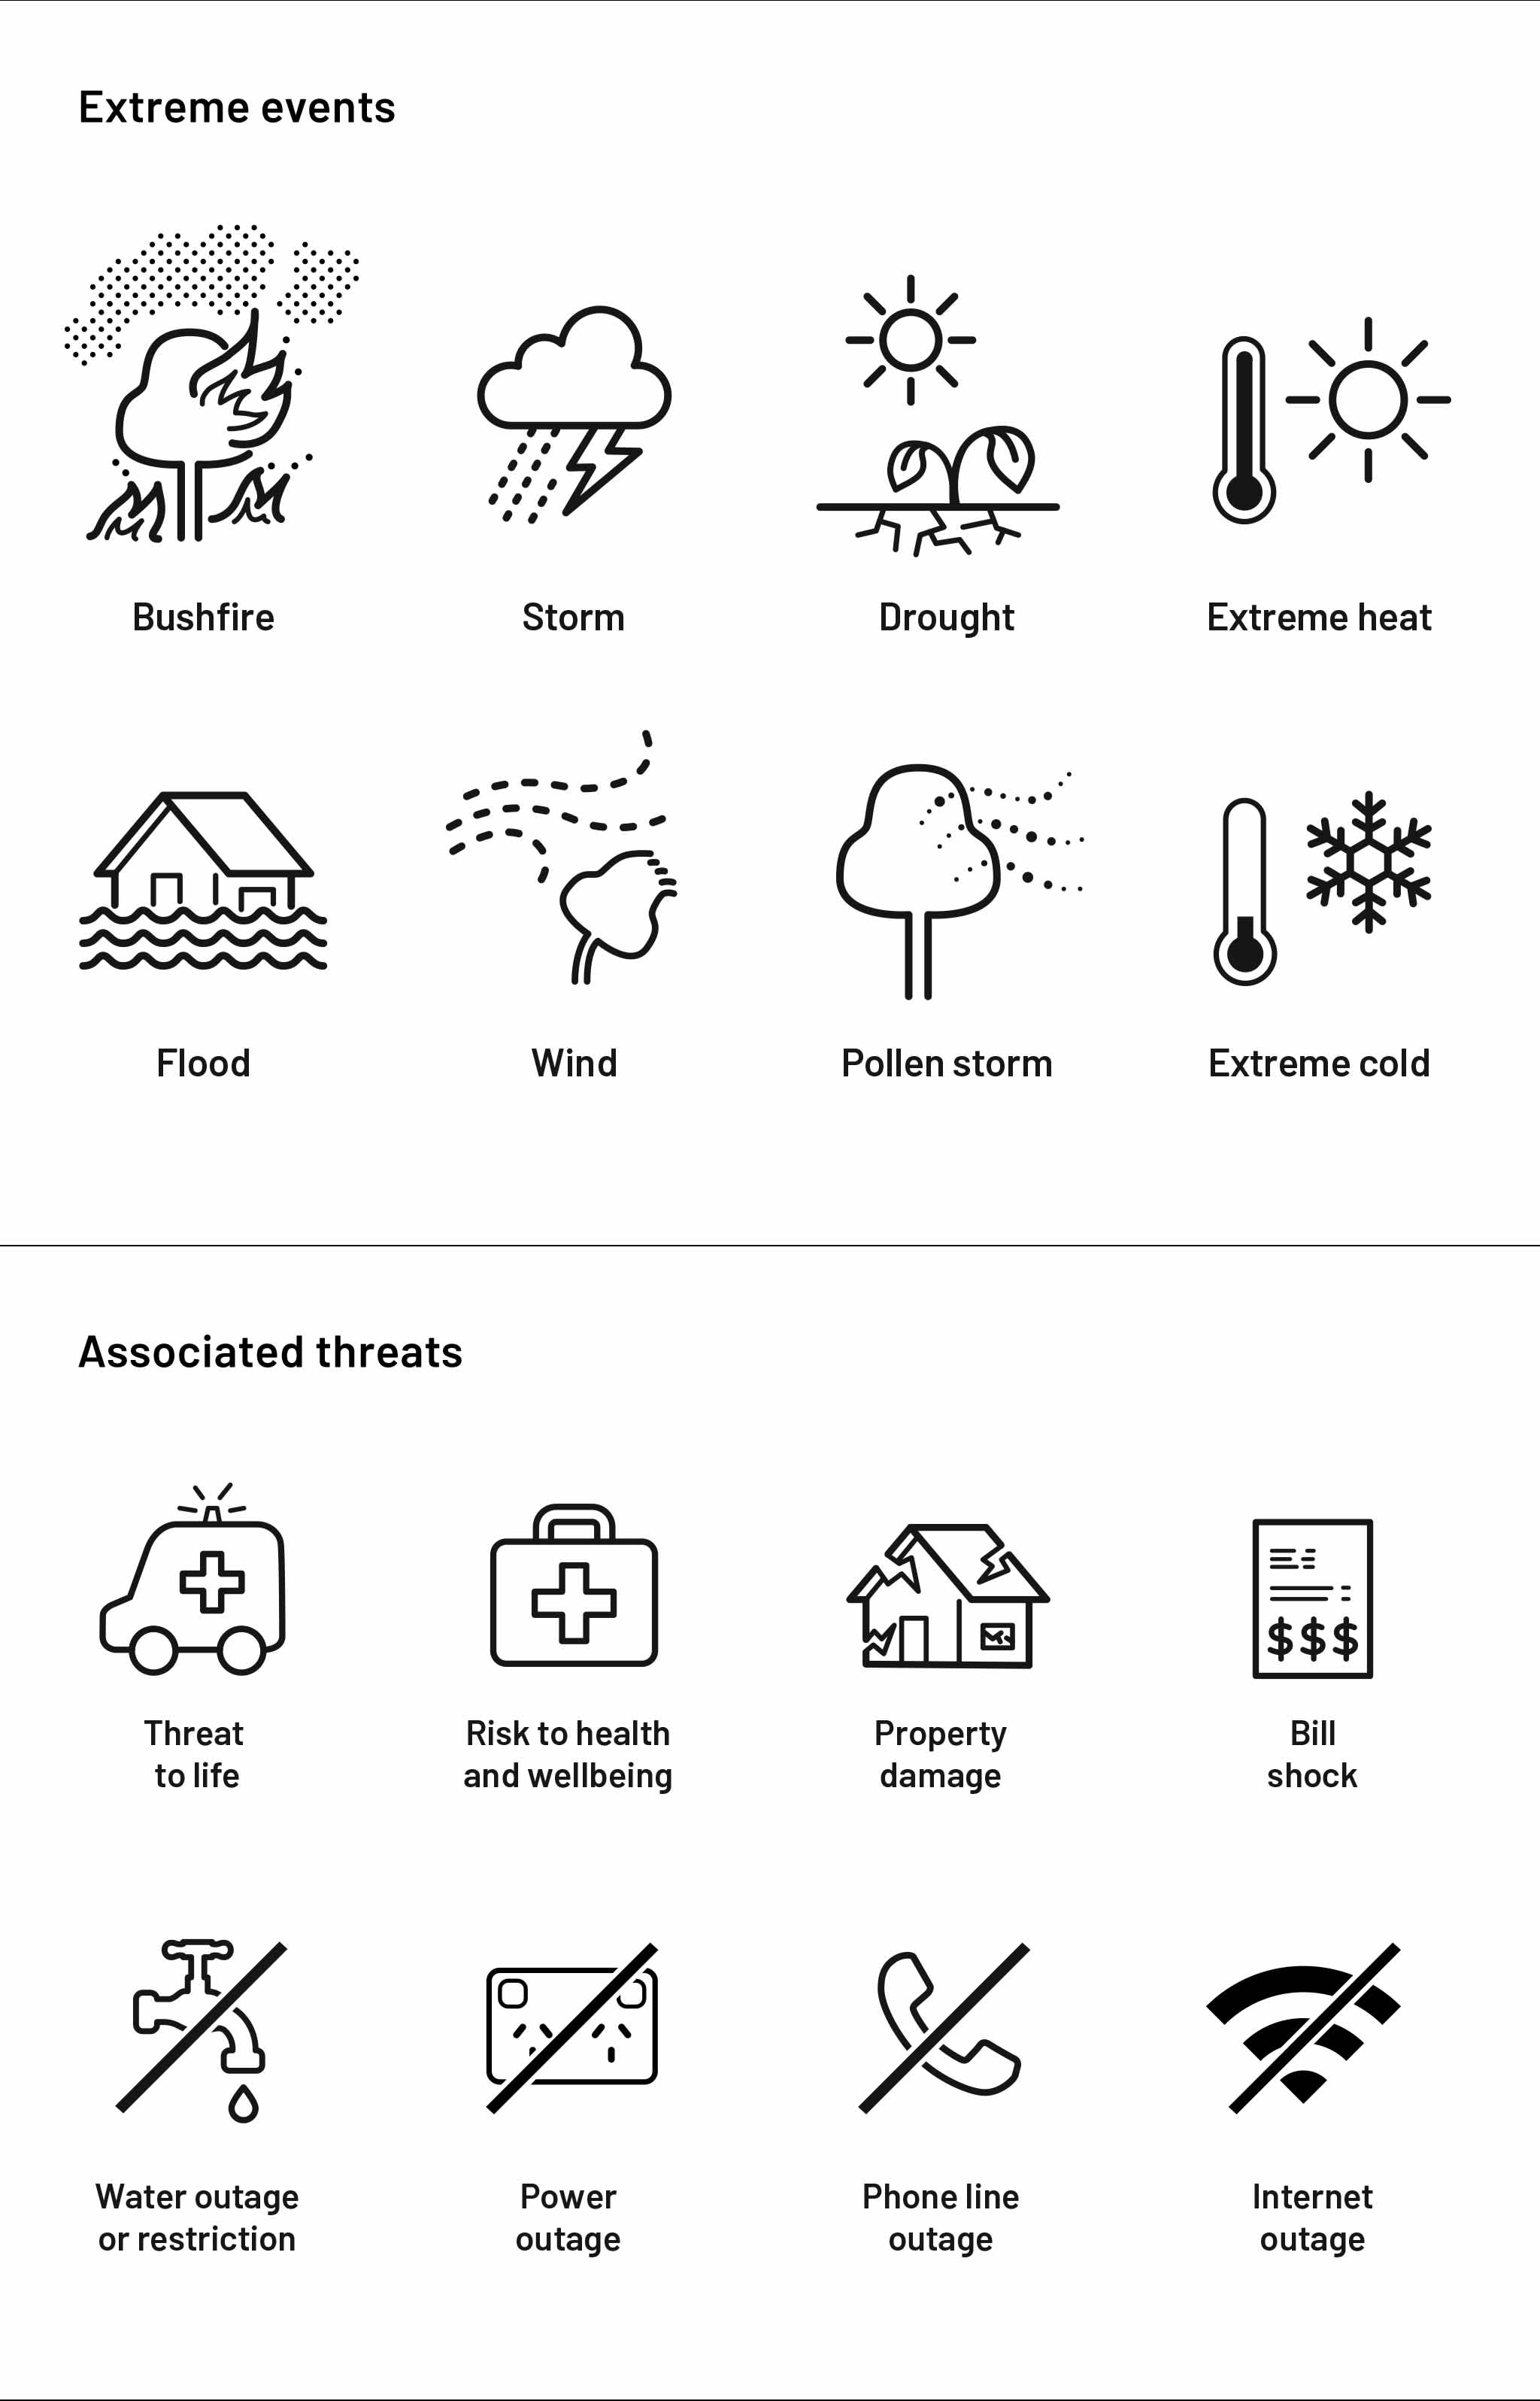 Various icons representing extreme climate events and their associated threats